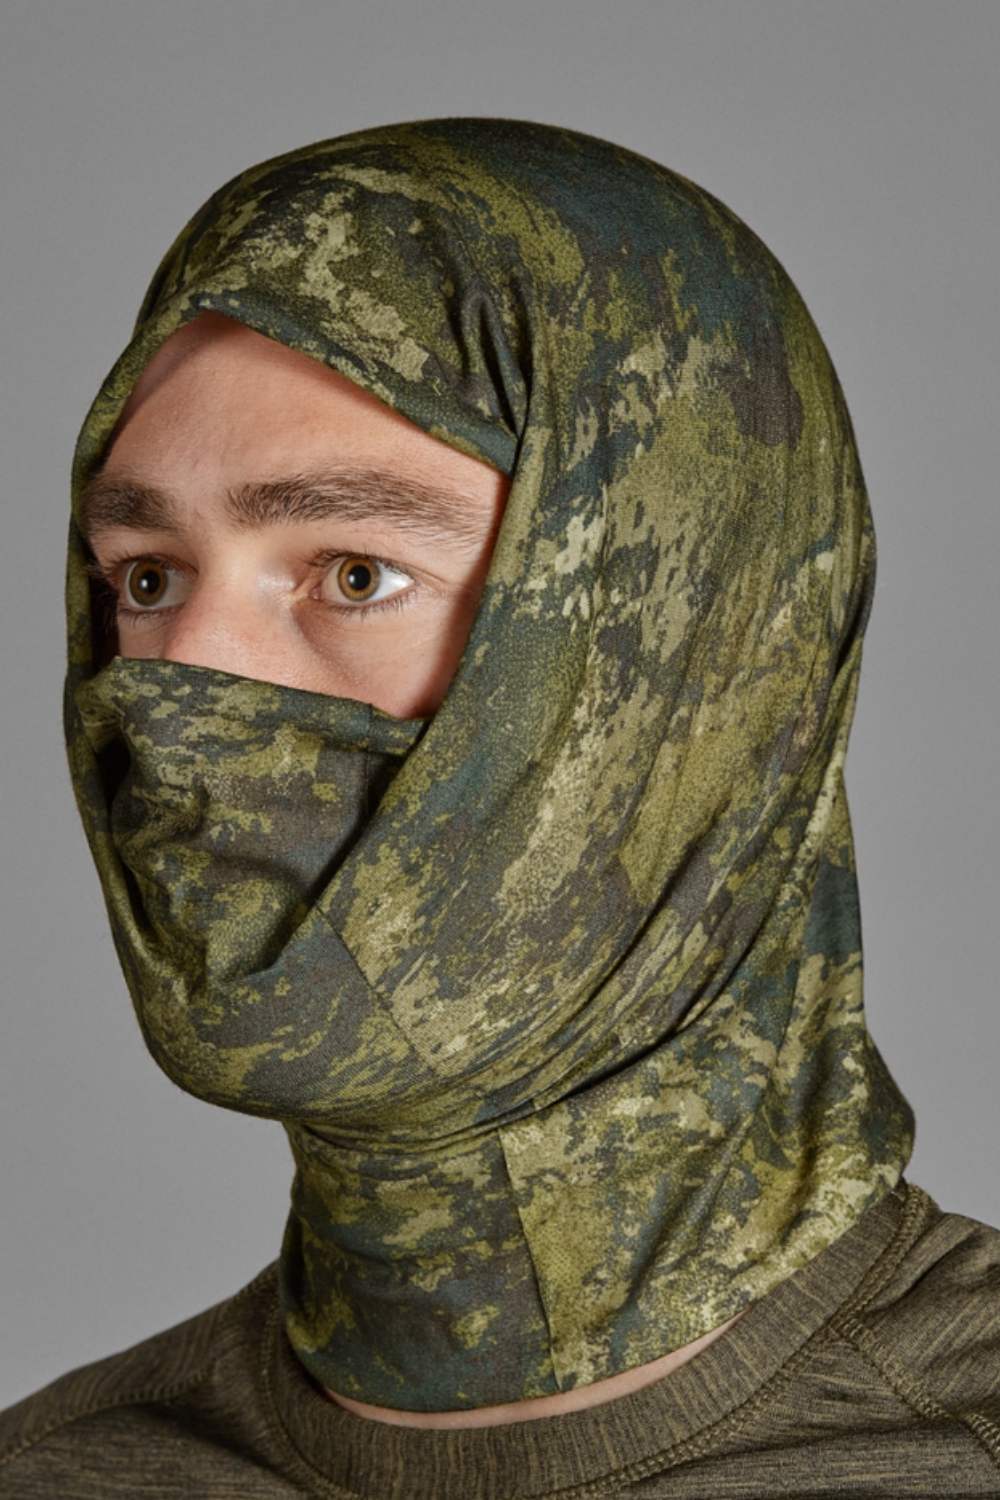 Seeland Neck Gaiter 2 Pack in invis green worn as a face covering